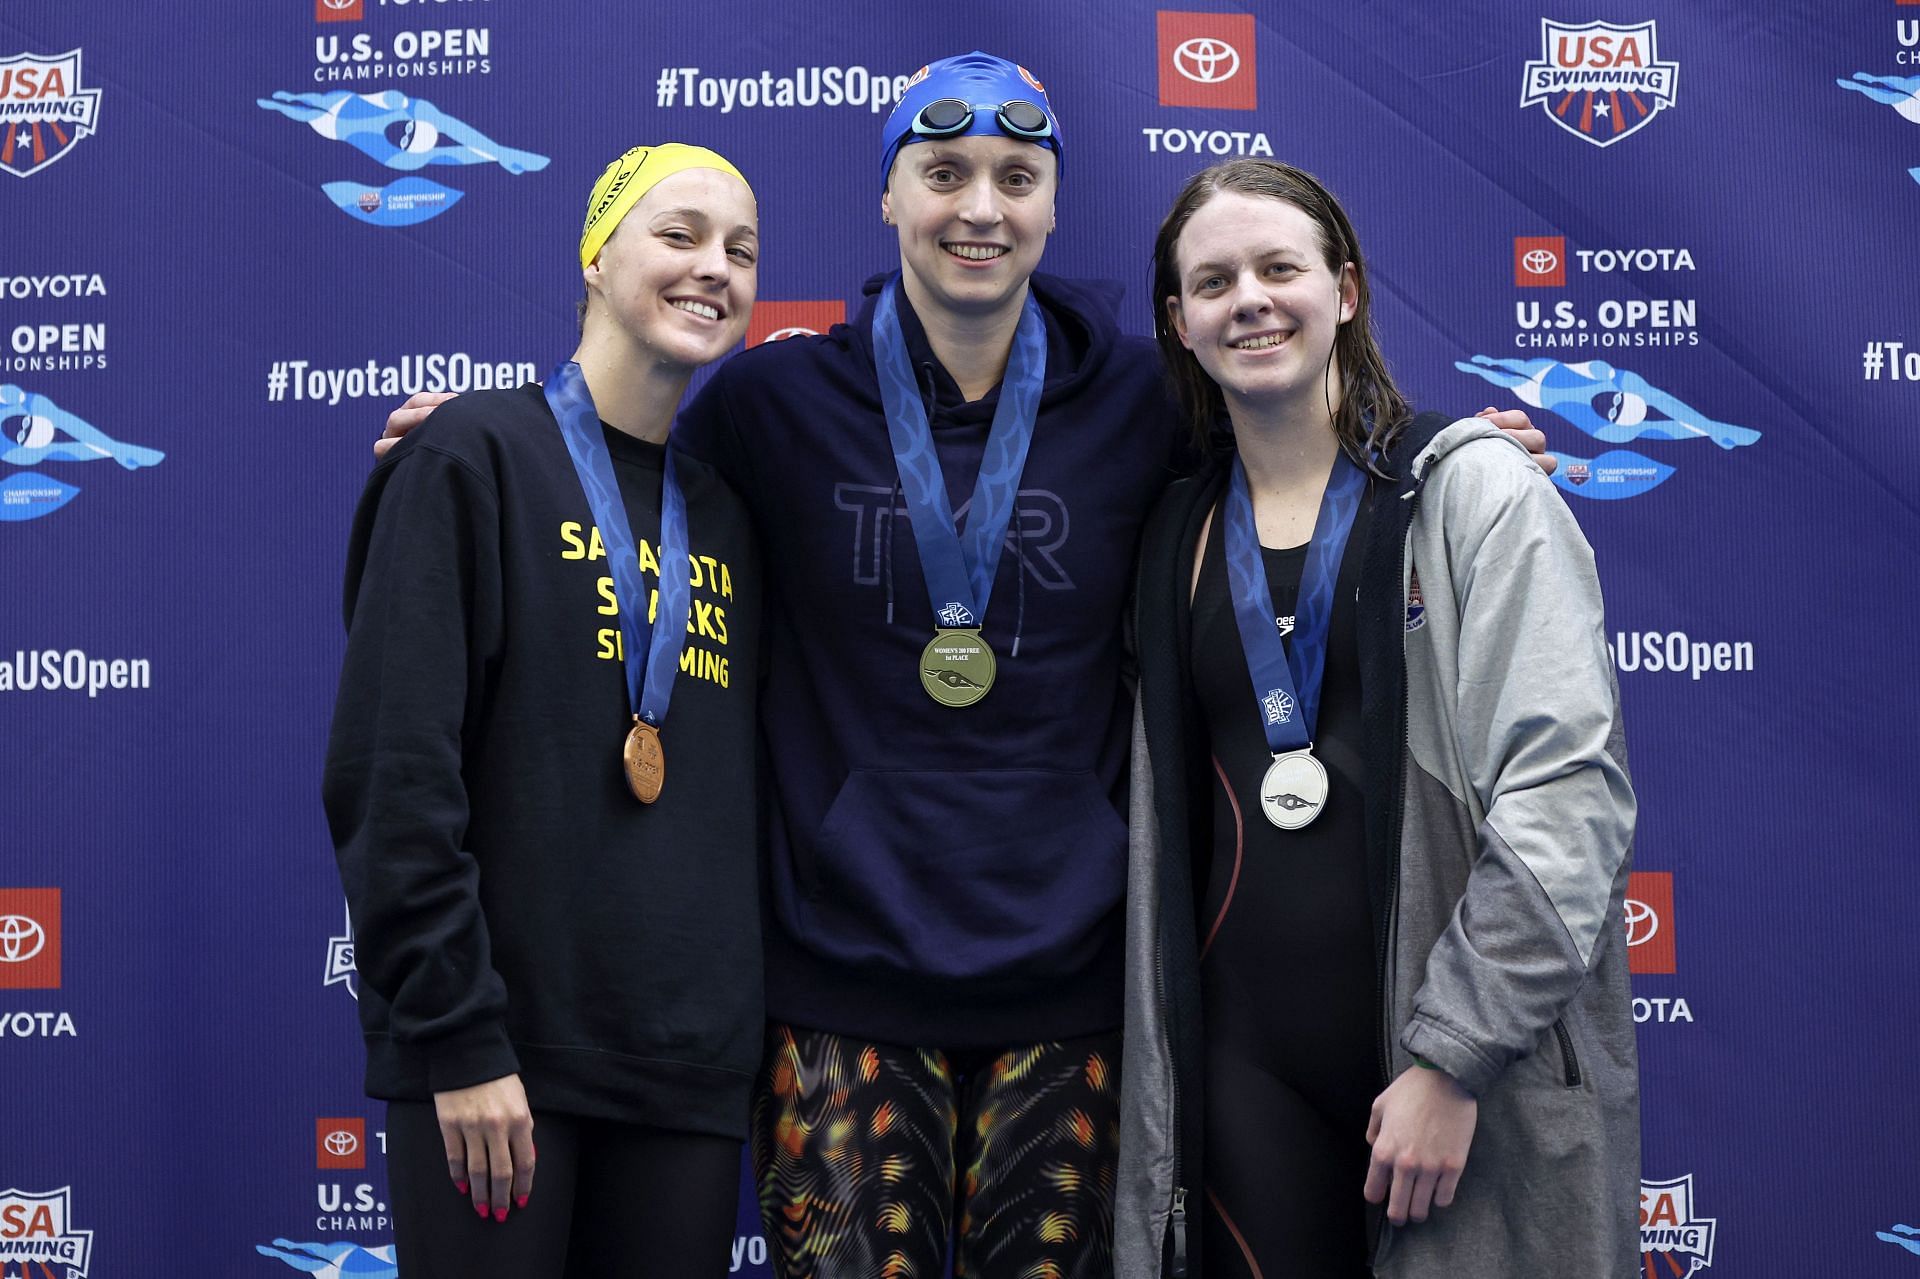 Gold medalist Katie Ledecky, silver medalist Erin Gemmell, and bronze medalist Addison Sauickie pose with their medals after competing in the Women&#039;s 200m Freestyle Final during the Toyota U.S. Open Championships at Greensboro Aquatic Center on December 02, 2022 in Greensboro, North Carolina. (Photo by Jared C. Tilton/Getty Images)